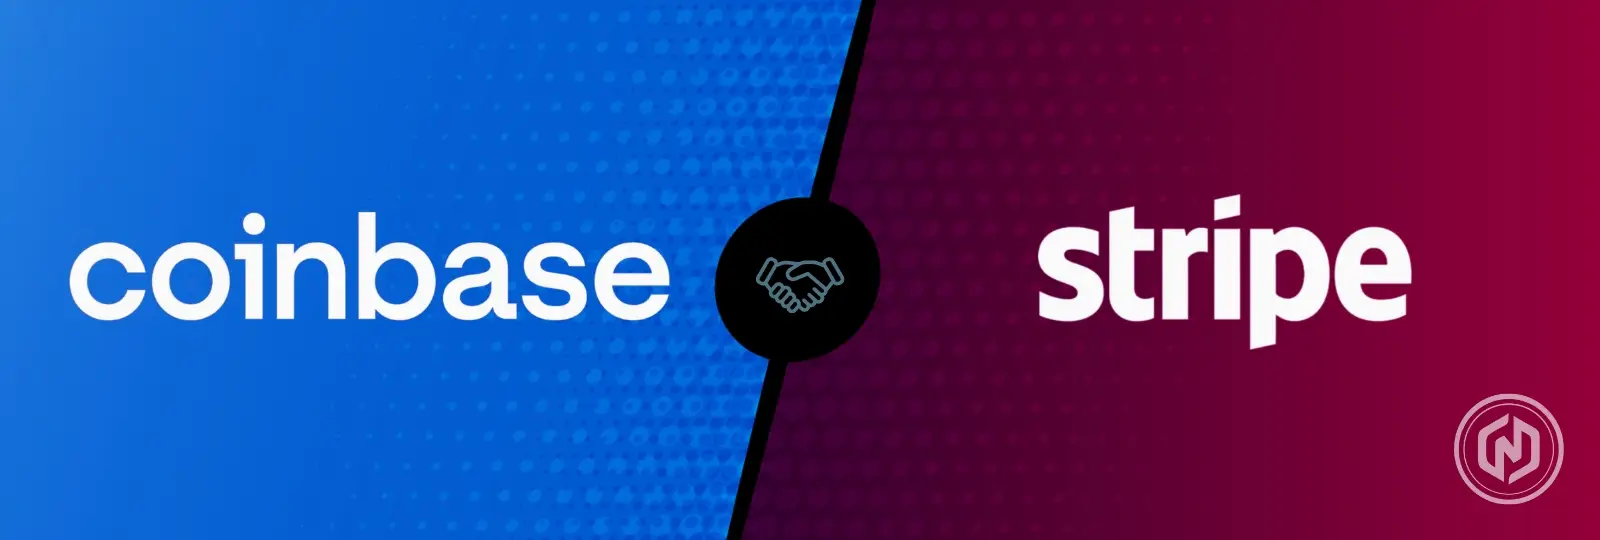 Coinbase collaborates with Stripe to boost crypto’s global adoption